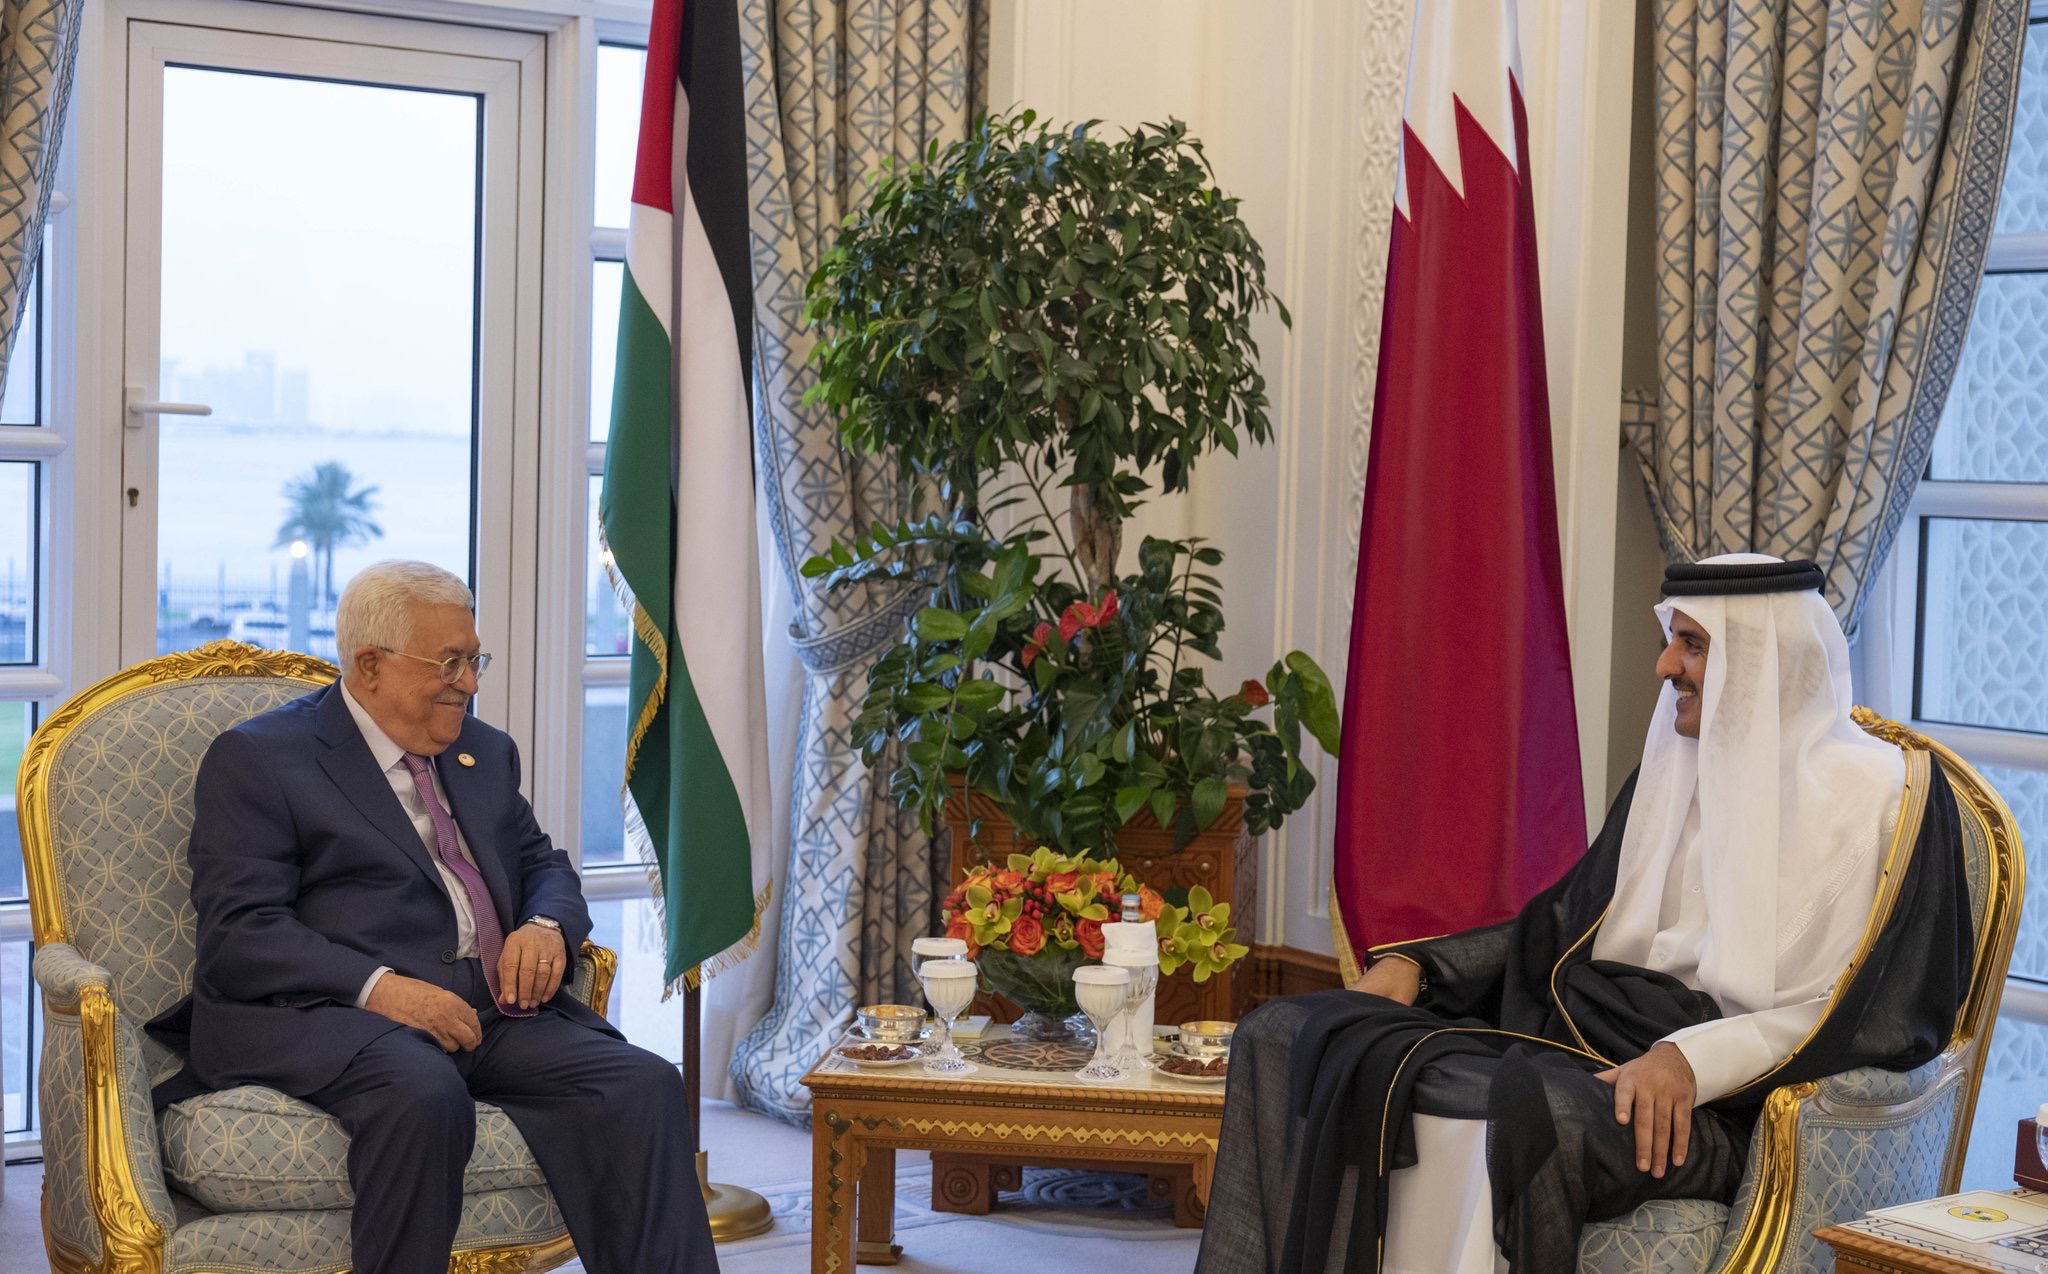 Qatar's Amir meets with the Palestinian President